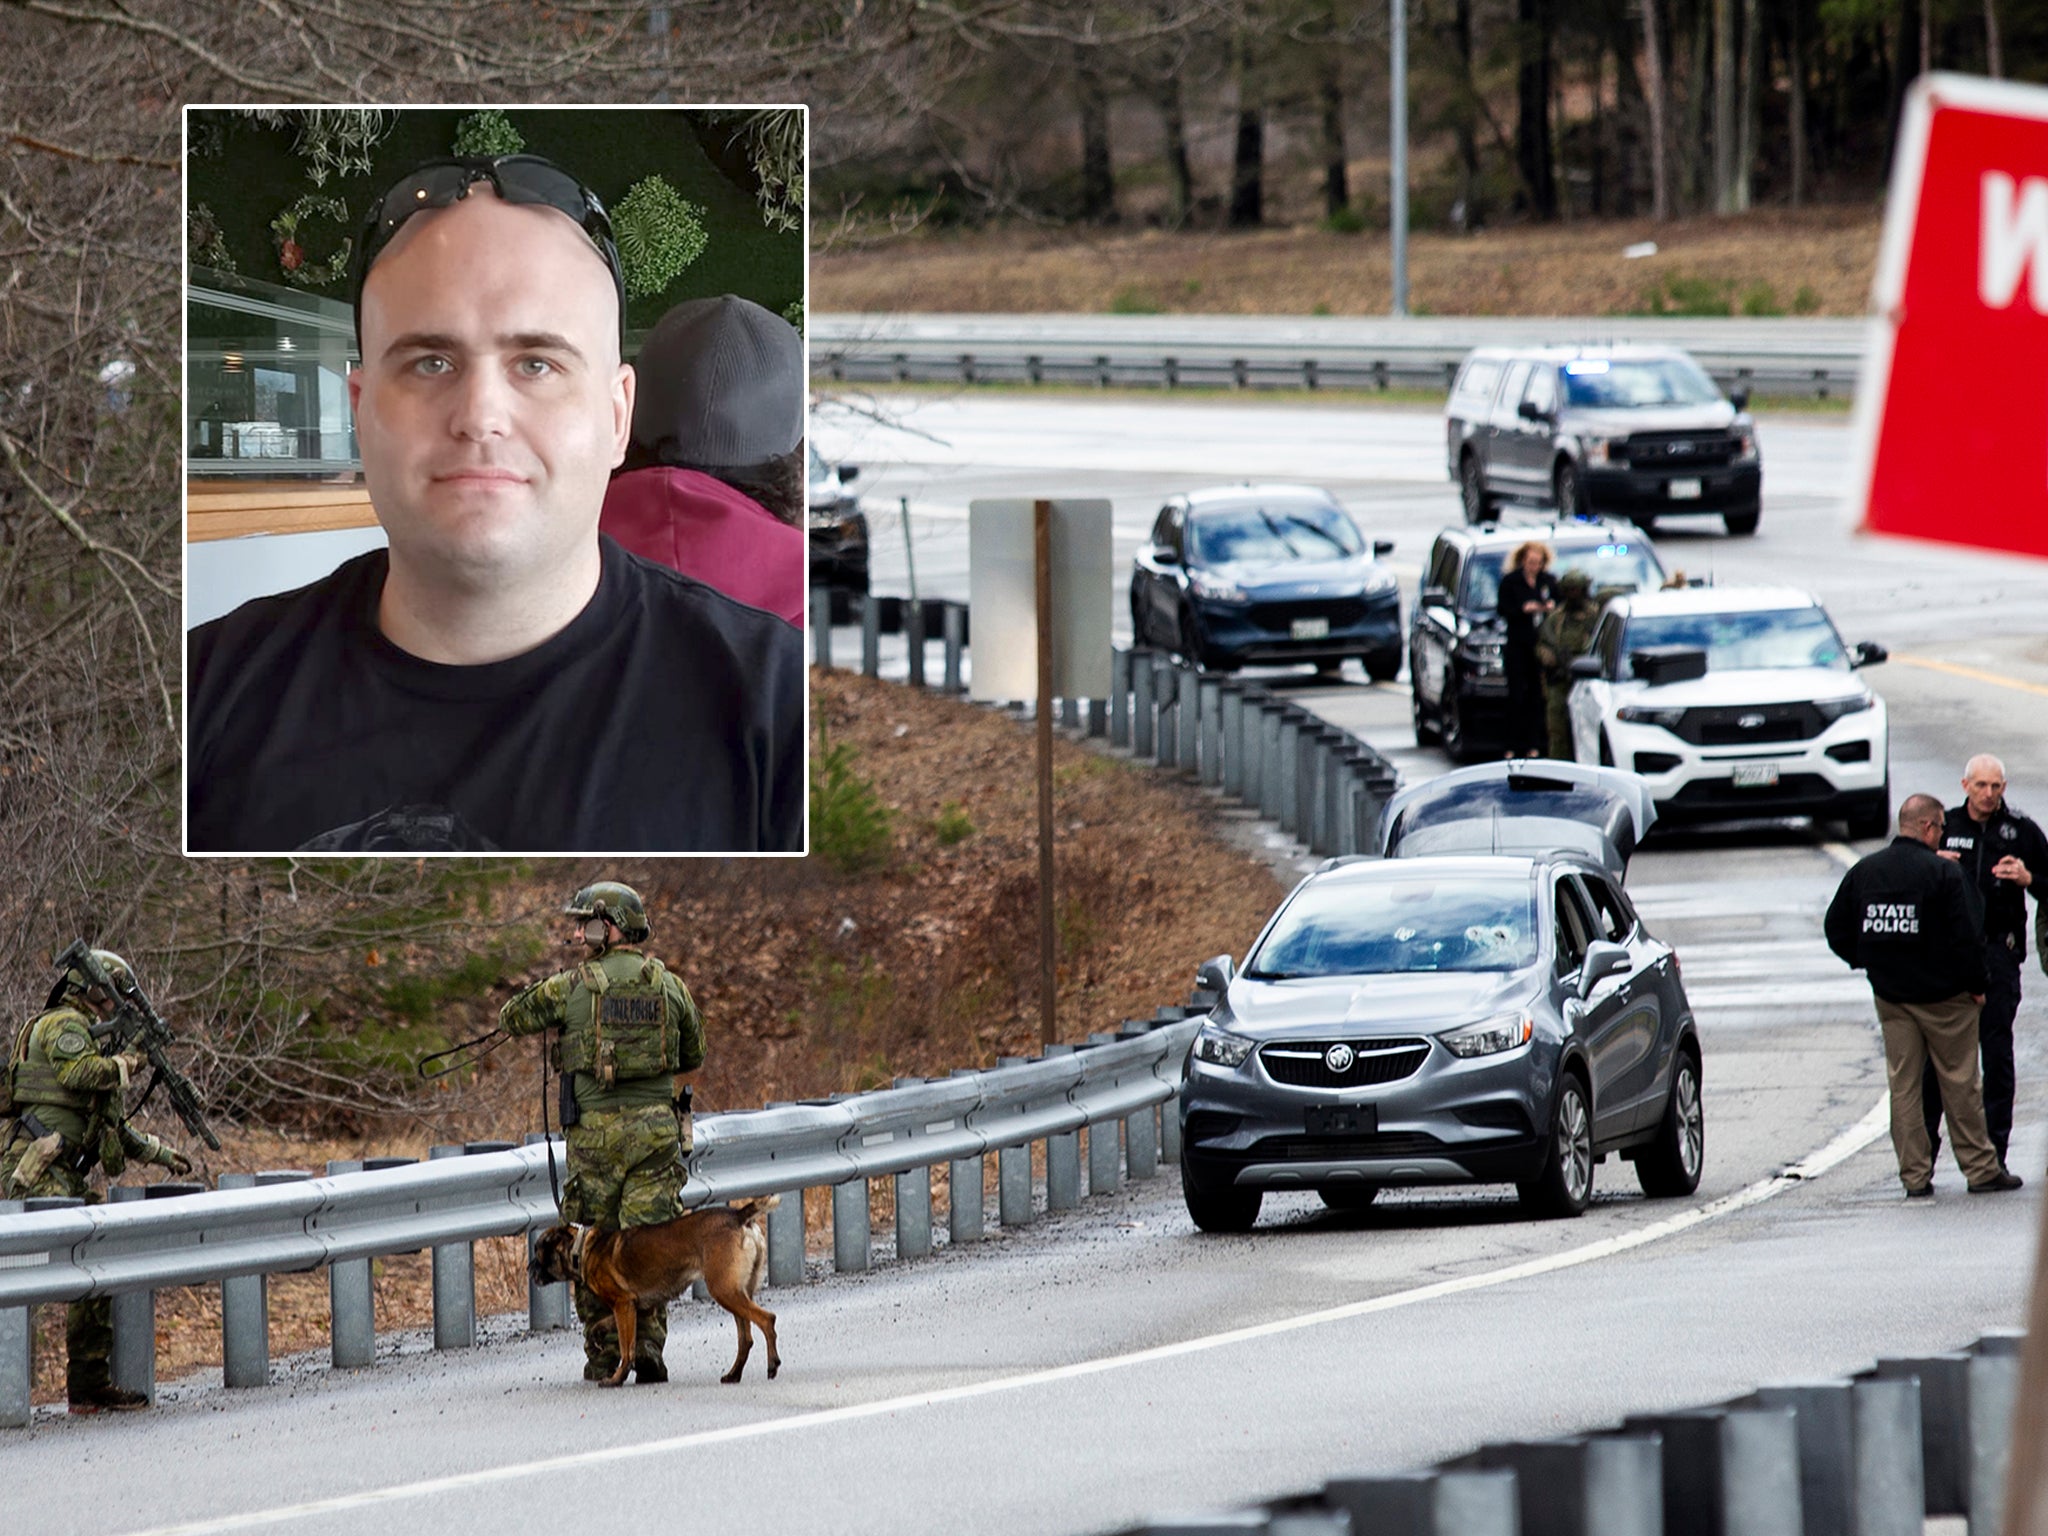 Joseph Eaton (inset) and the highway where he allegedly embarked on shooting